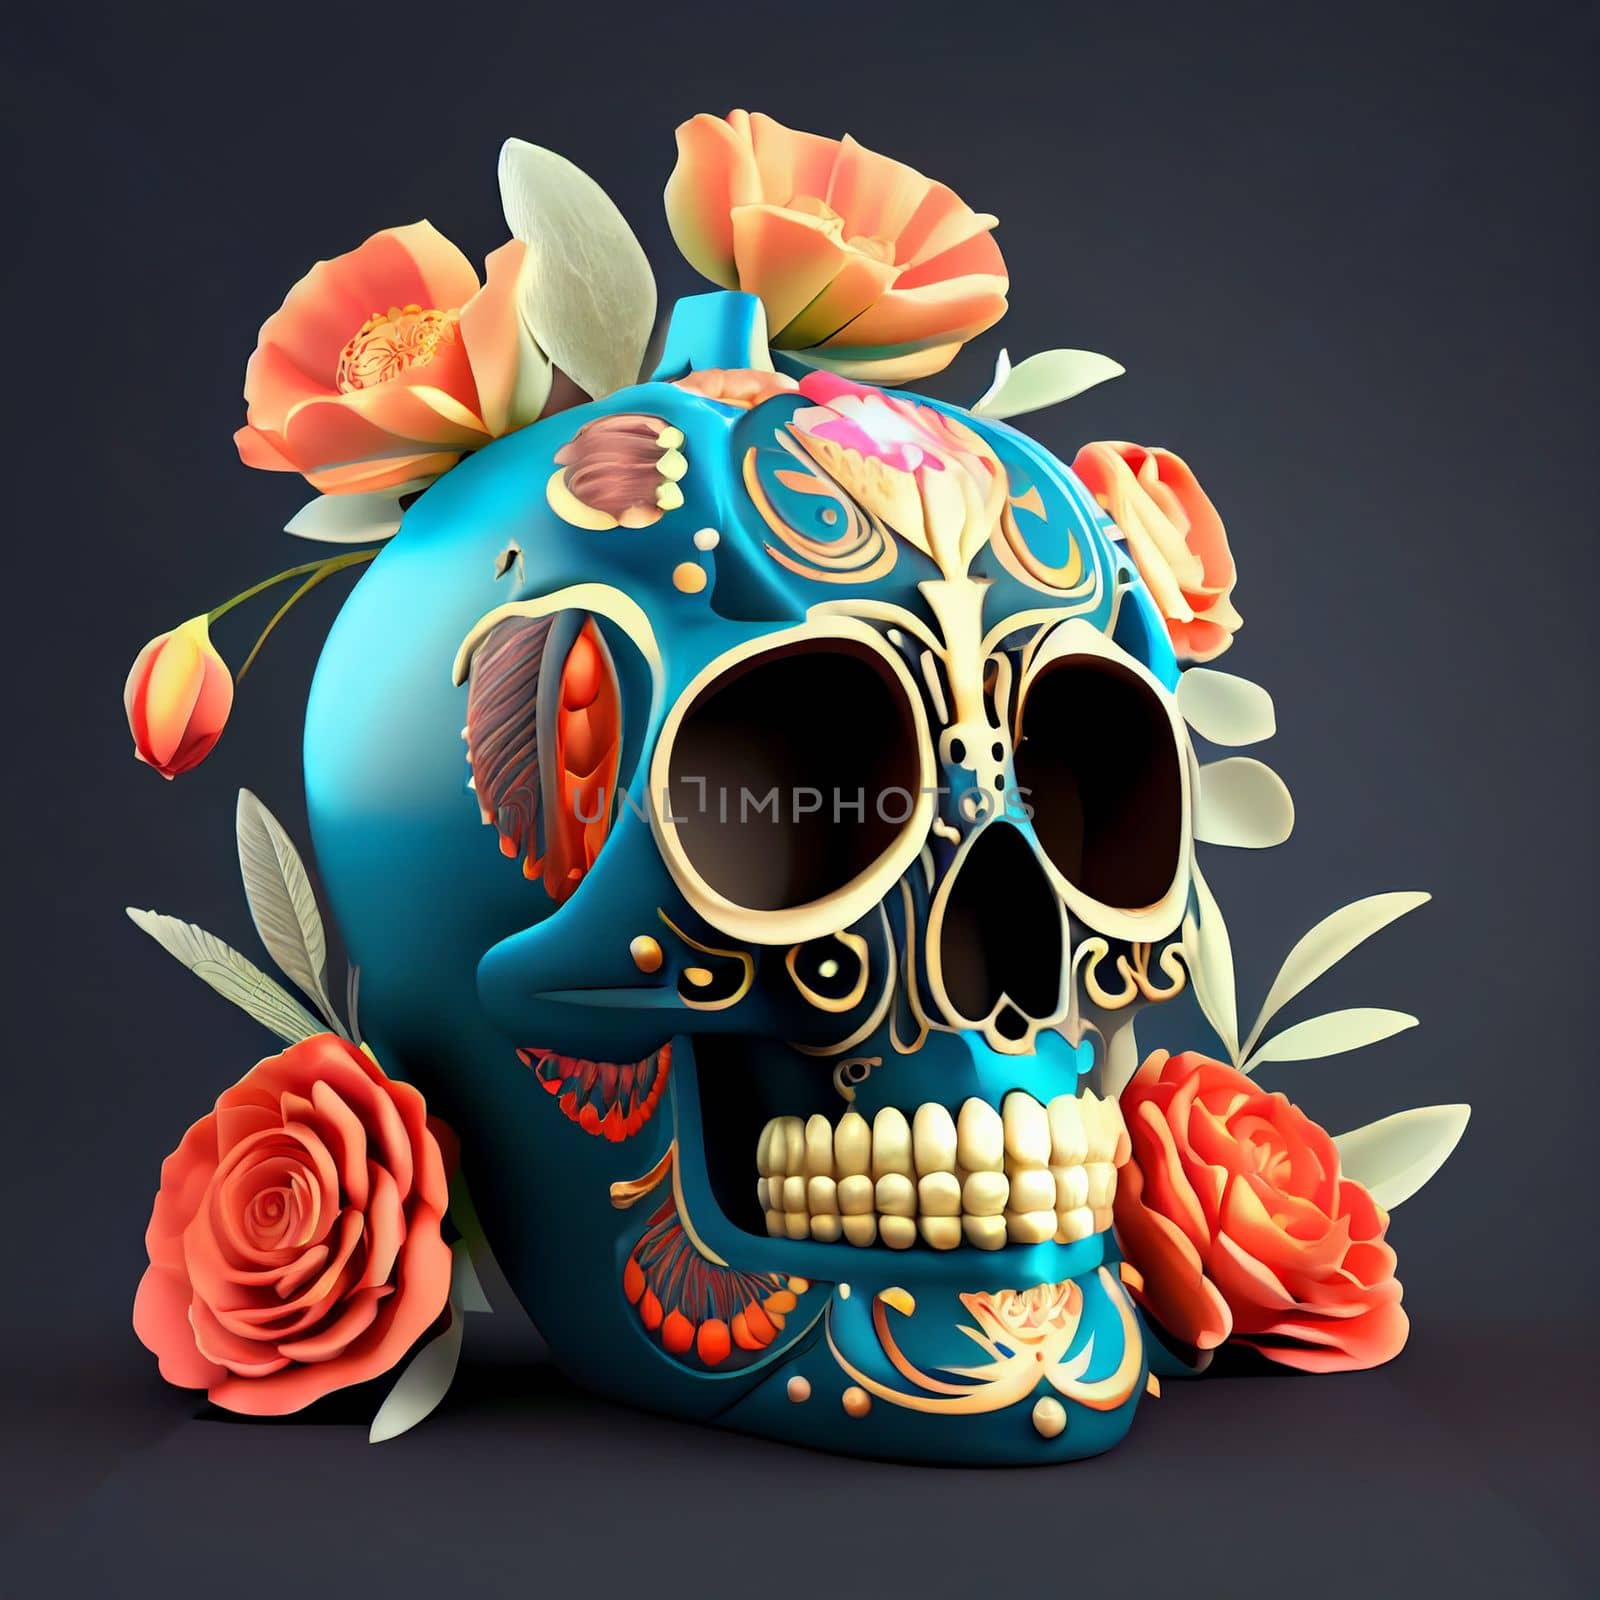 Traditional realistic Calavera, Sugar Skull decorated with flowers. The day of the dead, Dia de los Muertos celebration background. 3D illustration